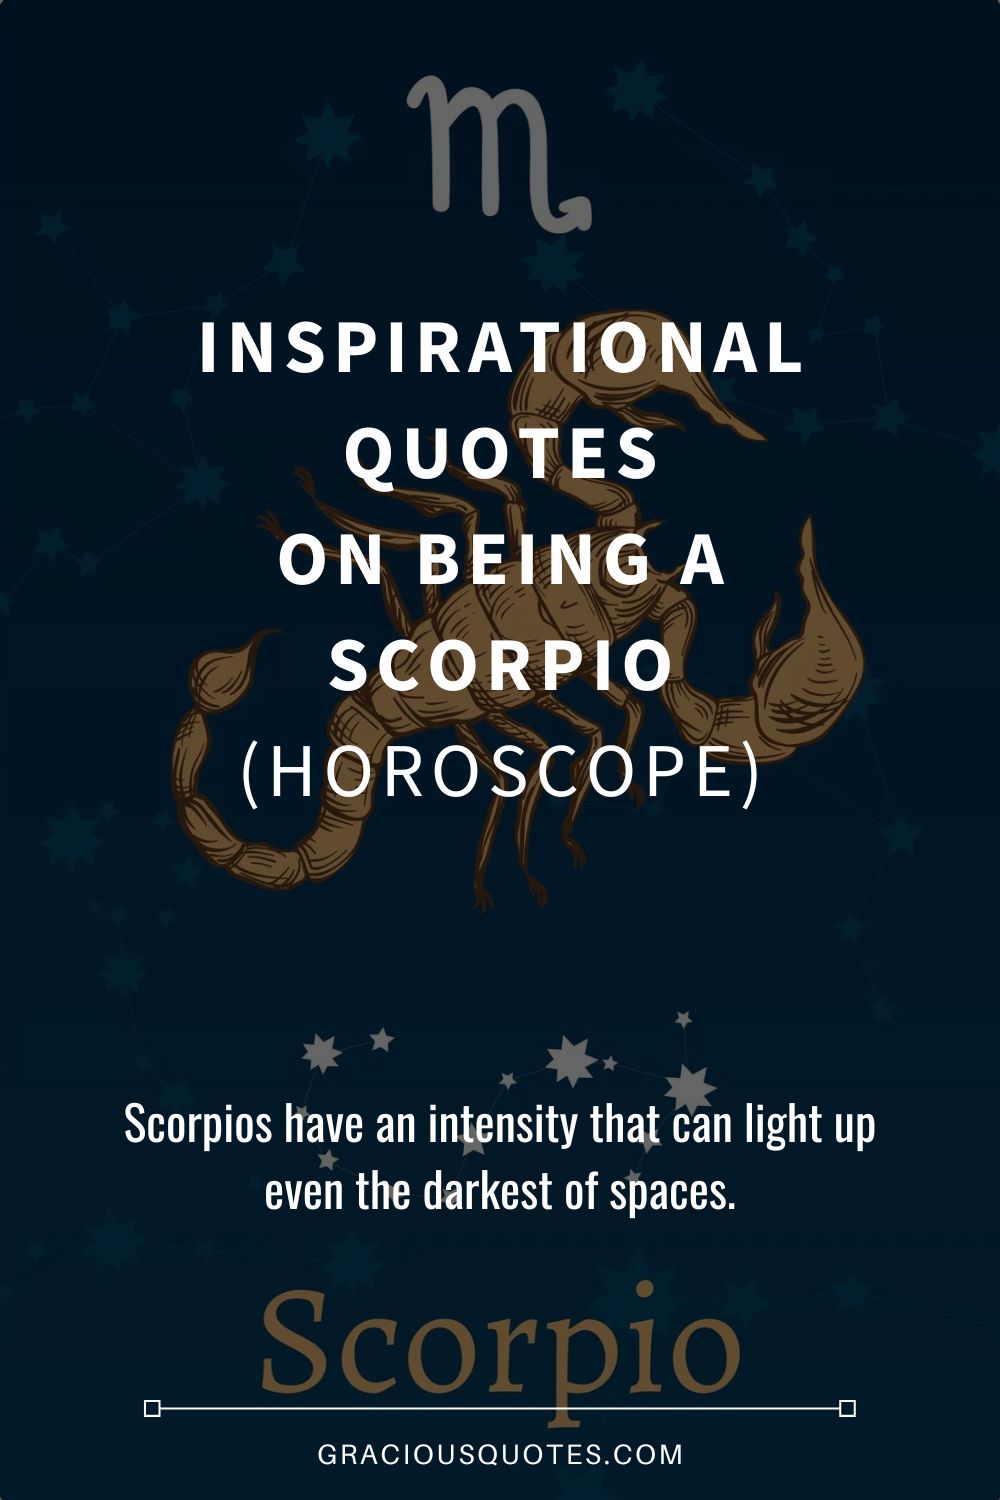 Inspirational Quotes on Being a Scorpio (HOROSCOPE) - Gracious Quotes